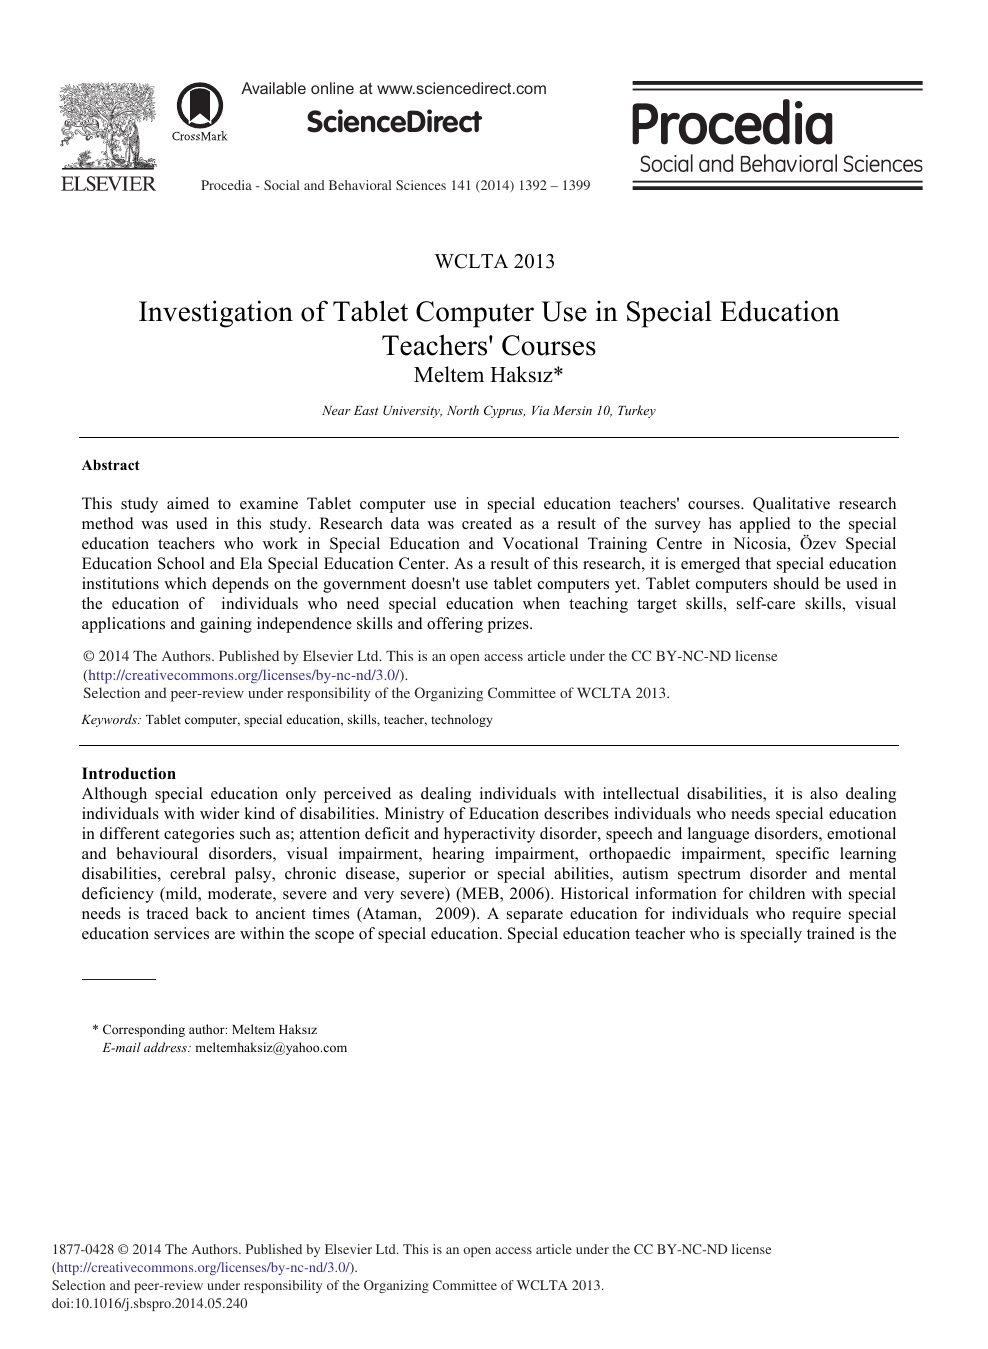 Investigation Of Tablet Computer Use In Special Education Teachers